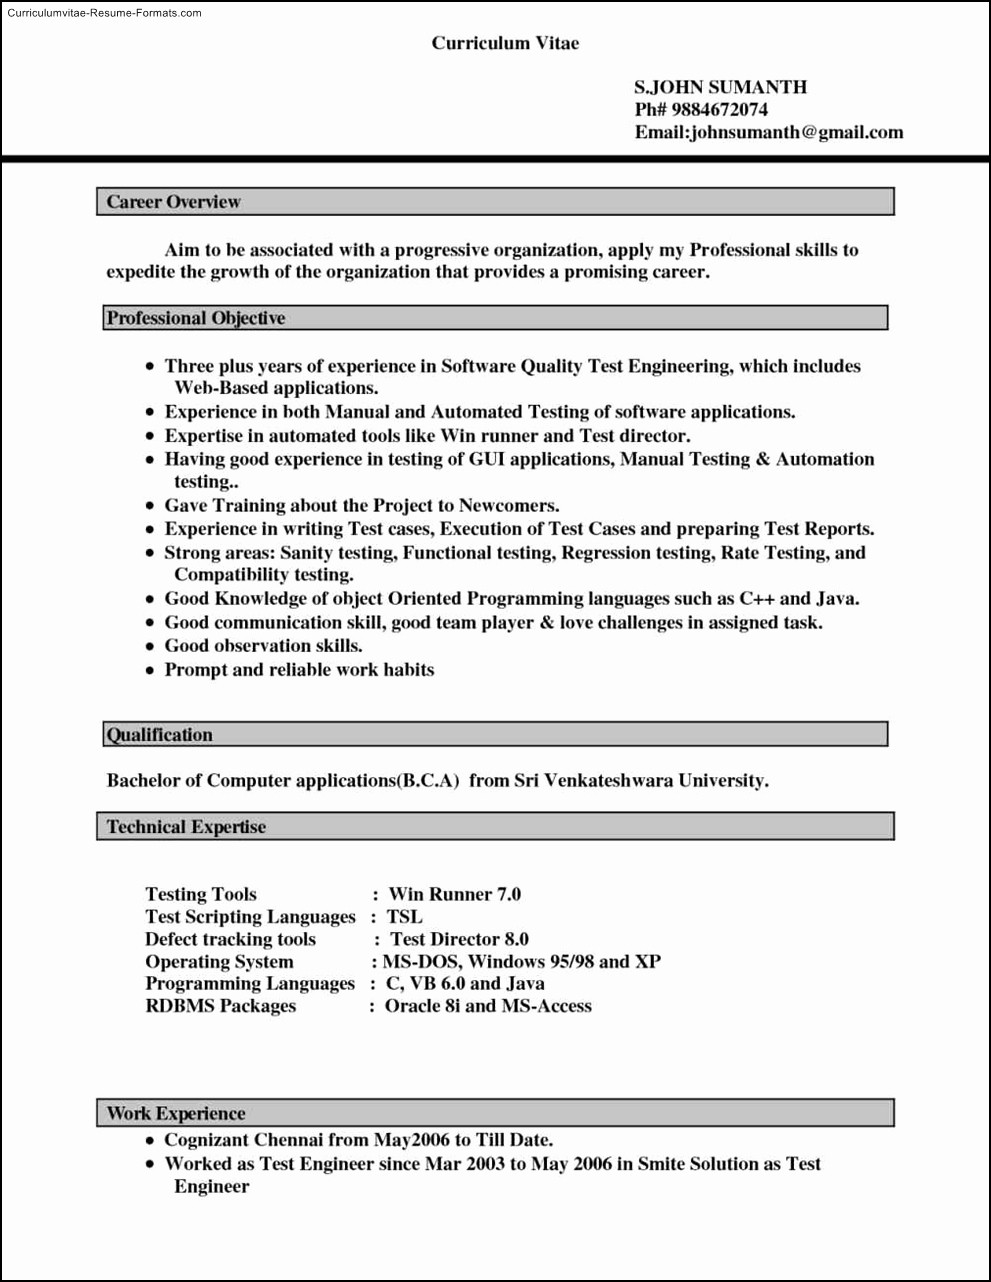 Resume Template On Word 2007 Lovely Free Resume Templates for Microsoft Word 2007 Free